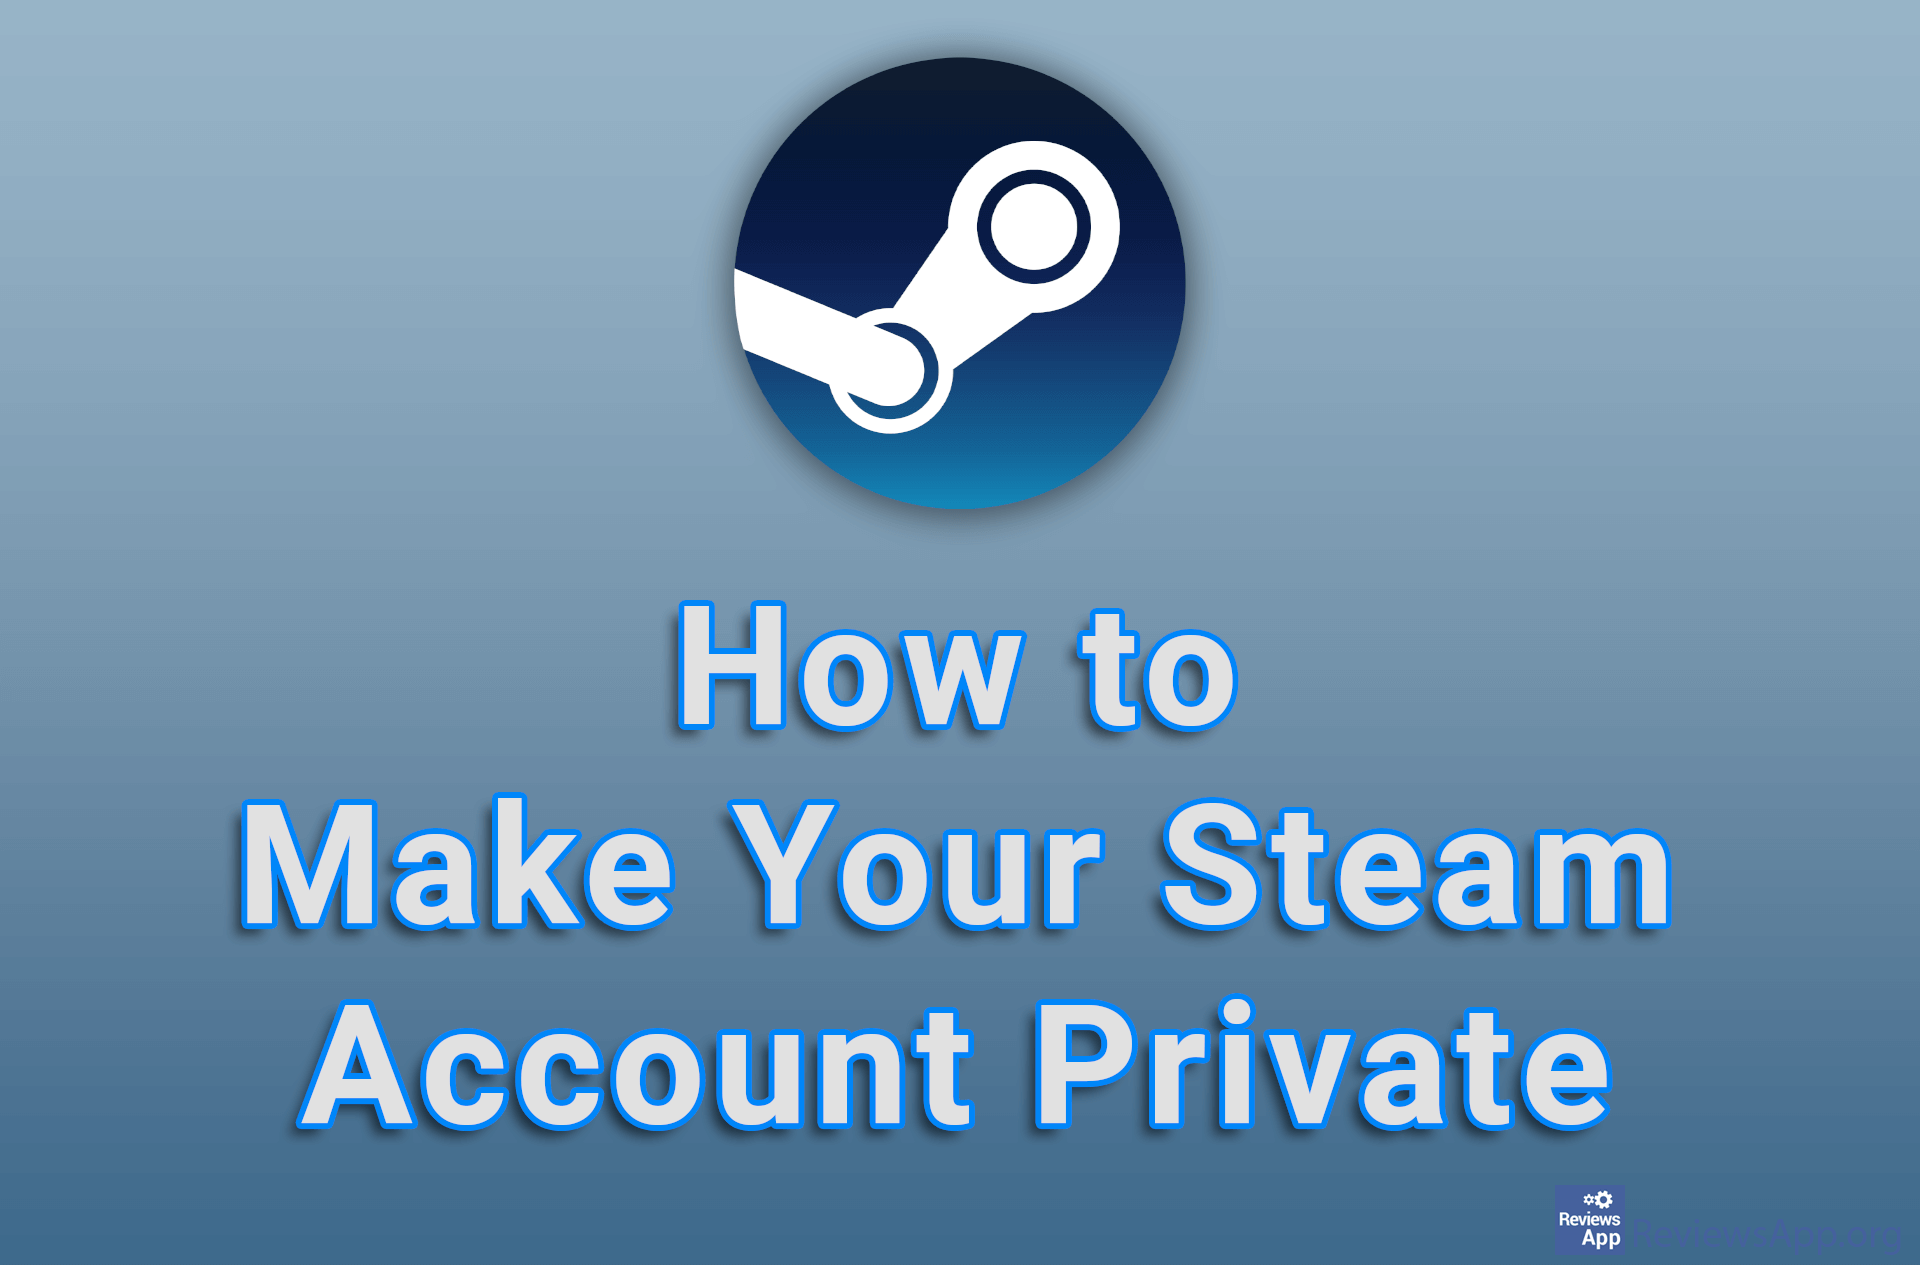 How to Make Your Steam Account Private